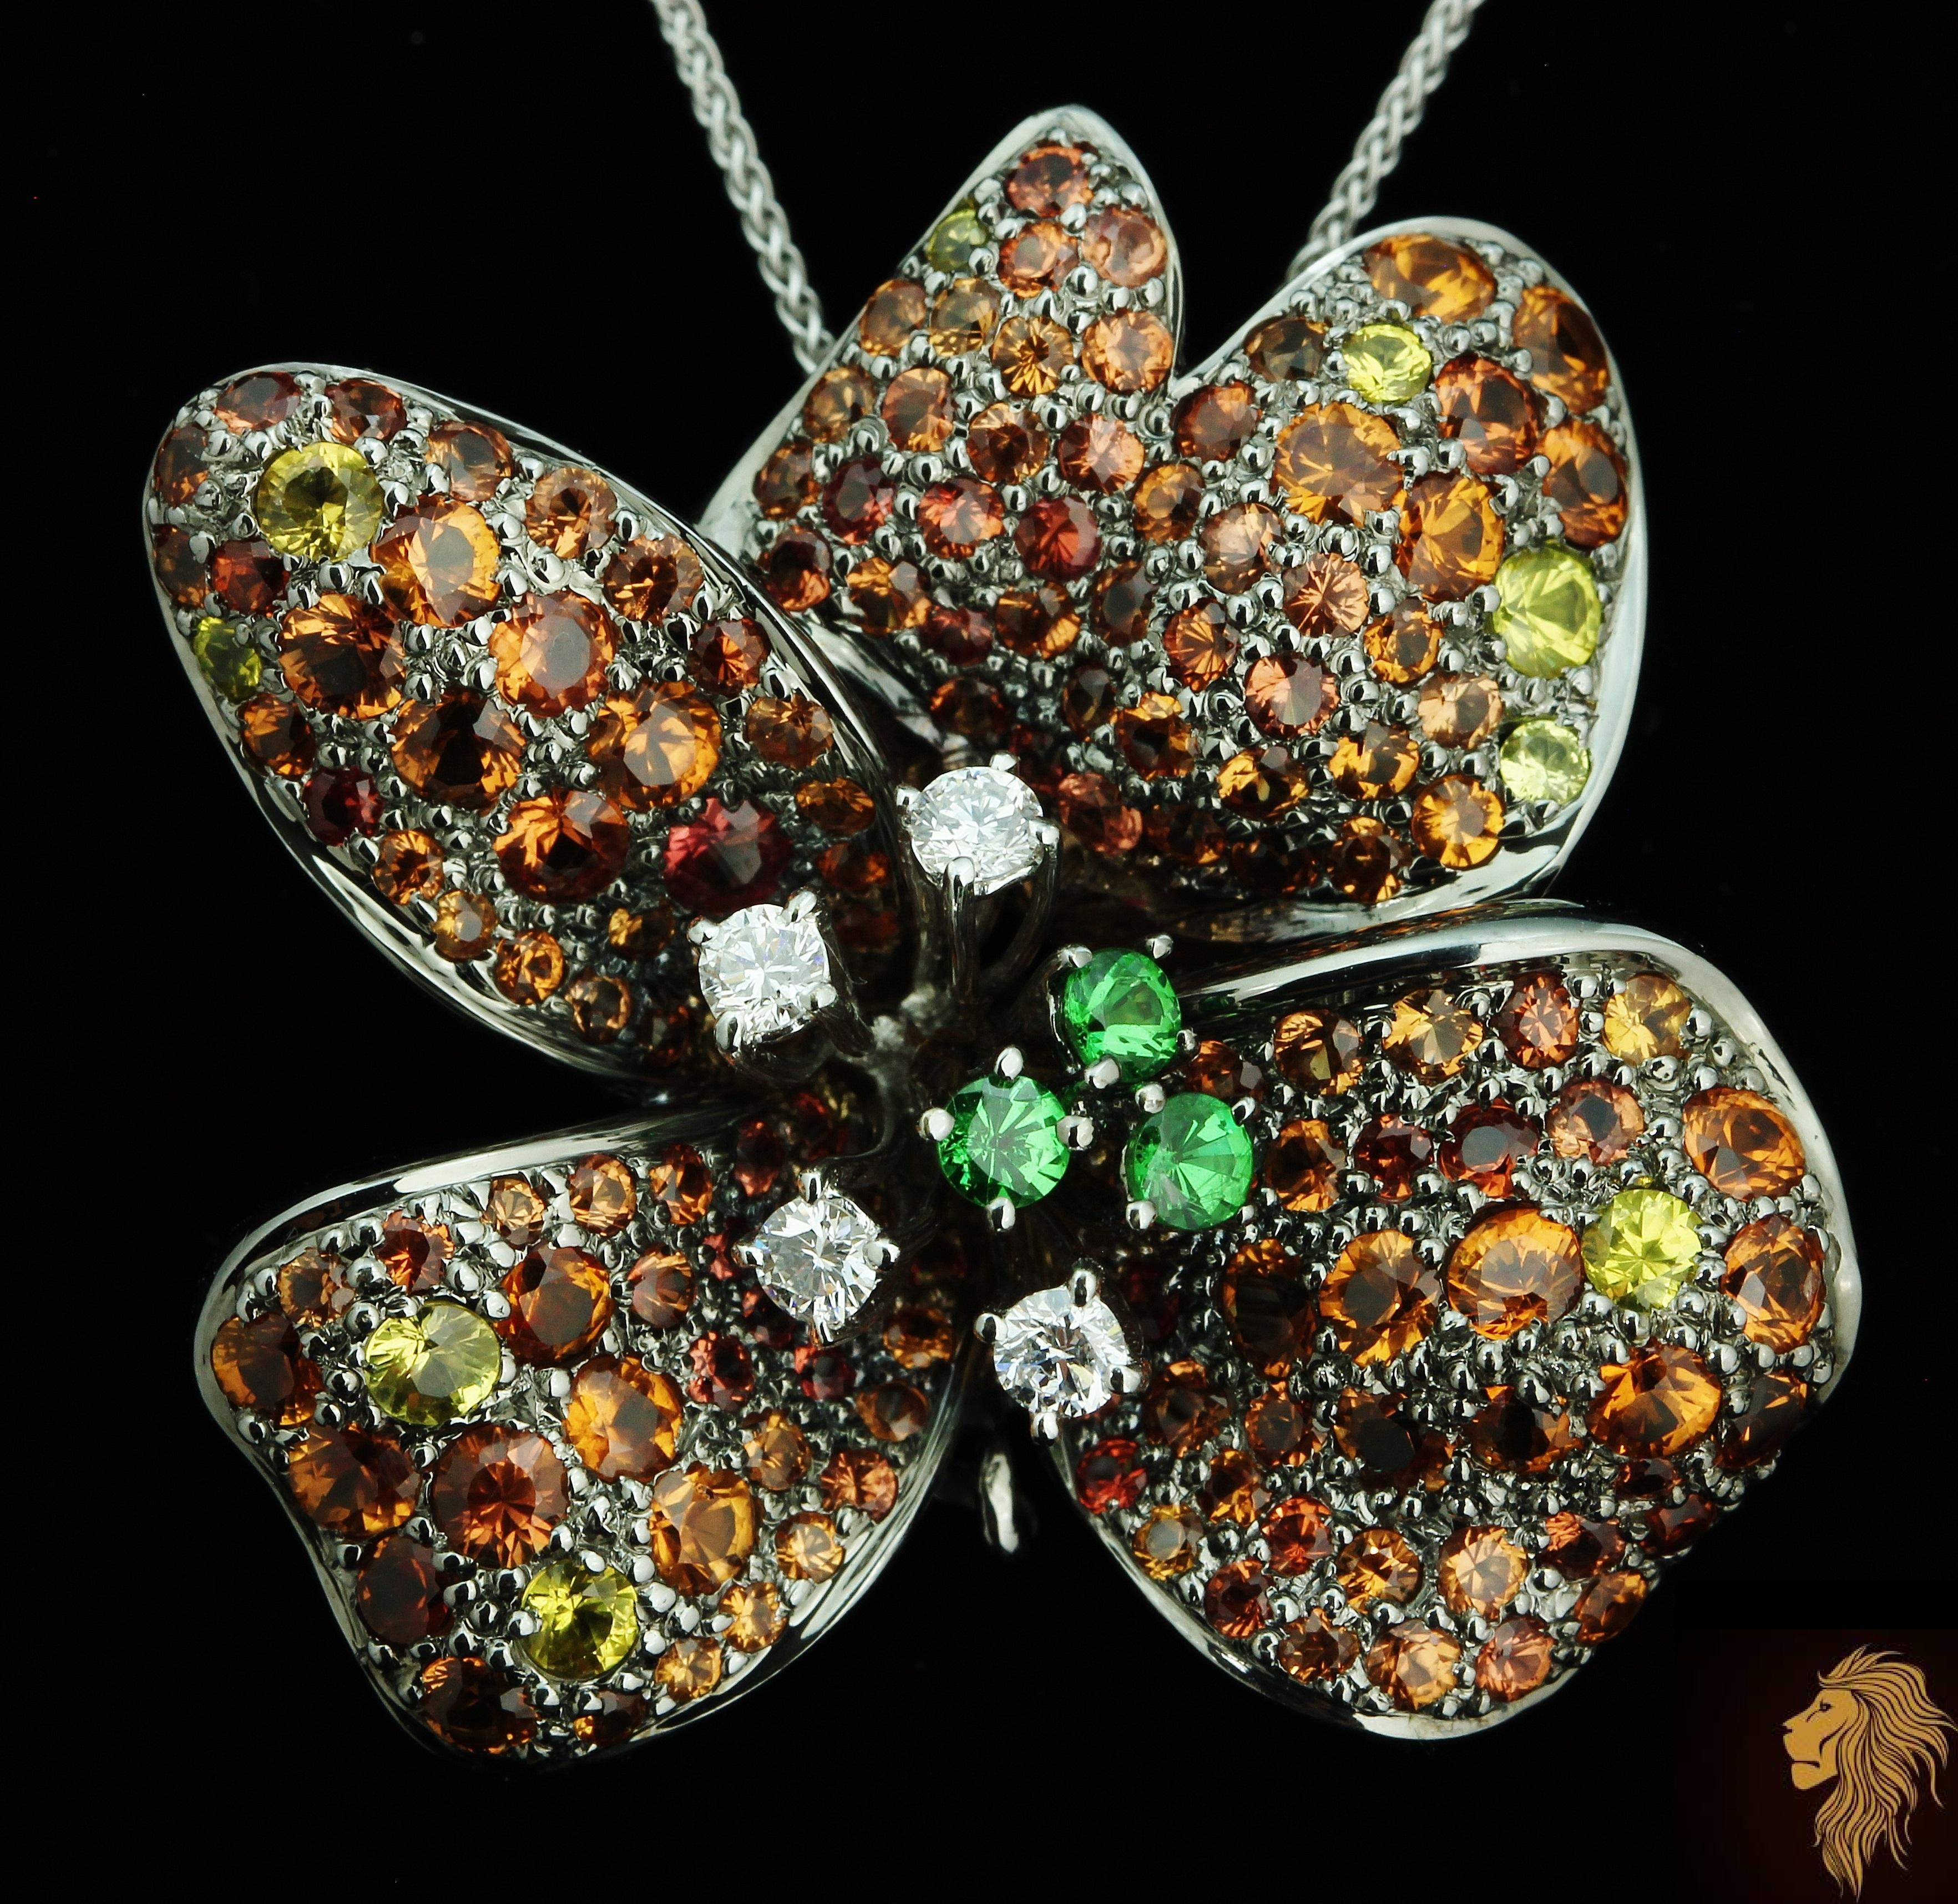 Designer Pendant brooch (can be worn both ways with dedicated pin for the brooch and hook for the pendant use)

NEW with tags, Tag Price $9750

18K solid White Gold

8.21 CWT Diamond and AAA Tsavorite Garnet and multi-color Sapphire, all natural and